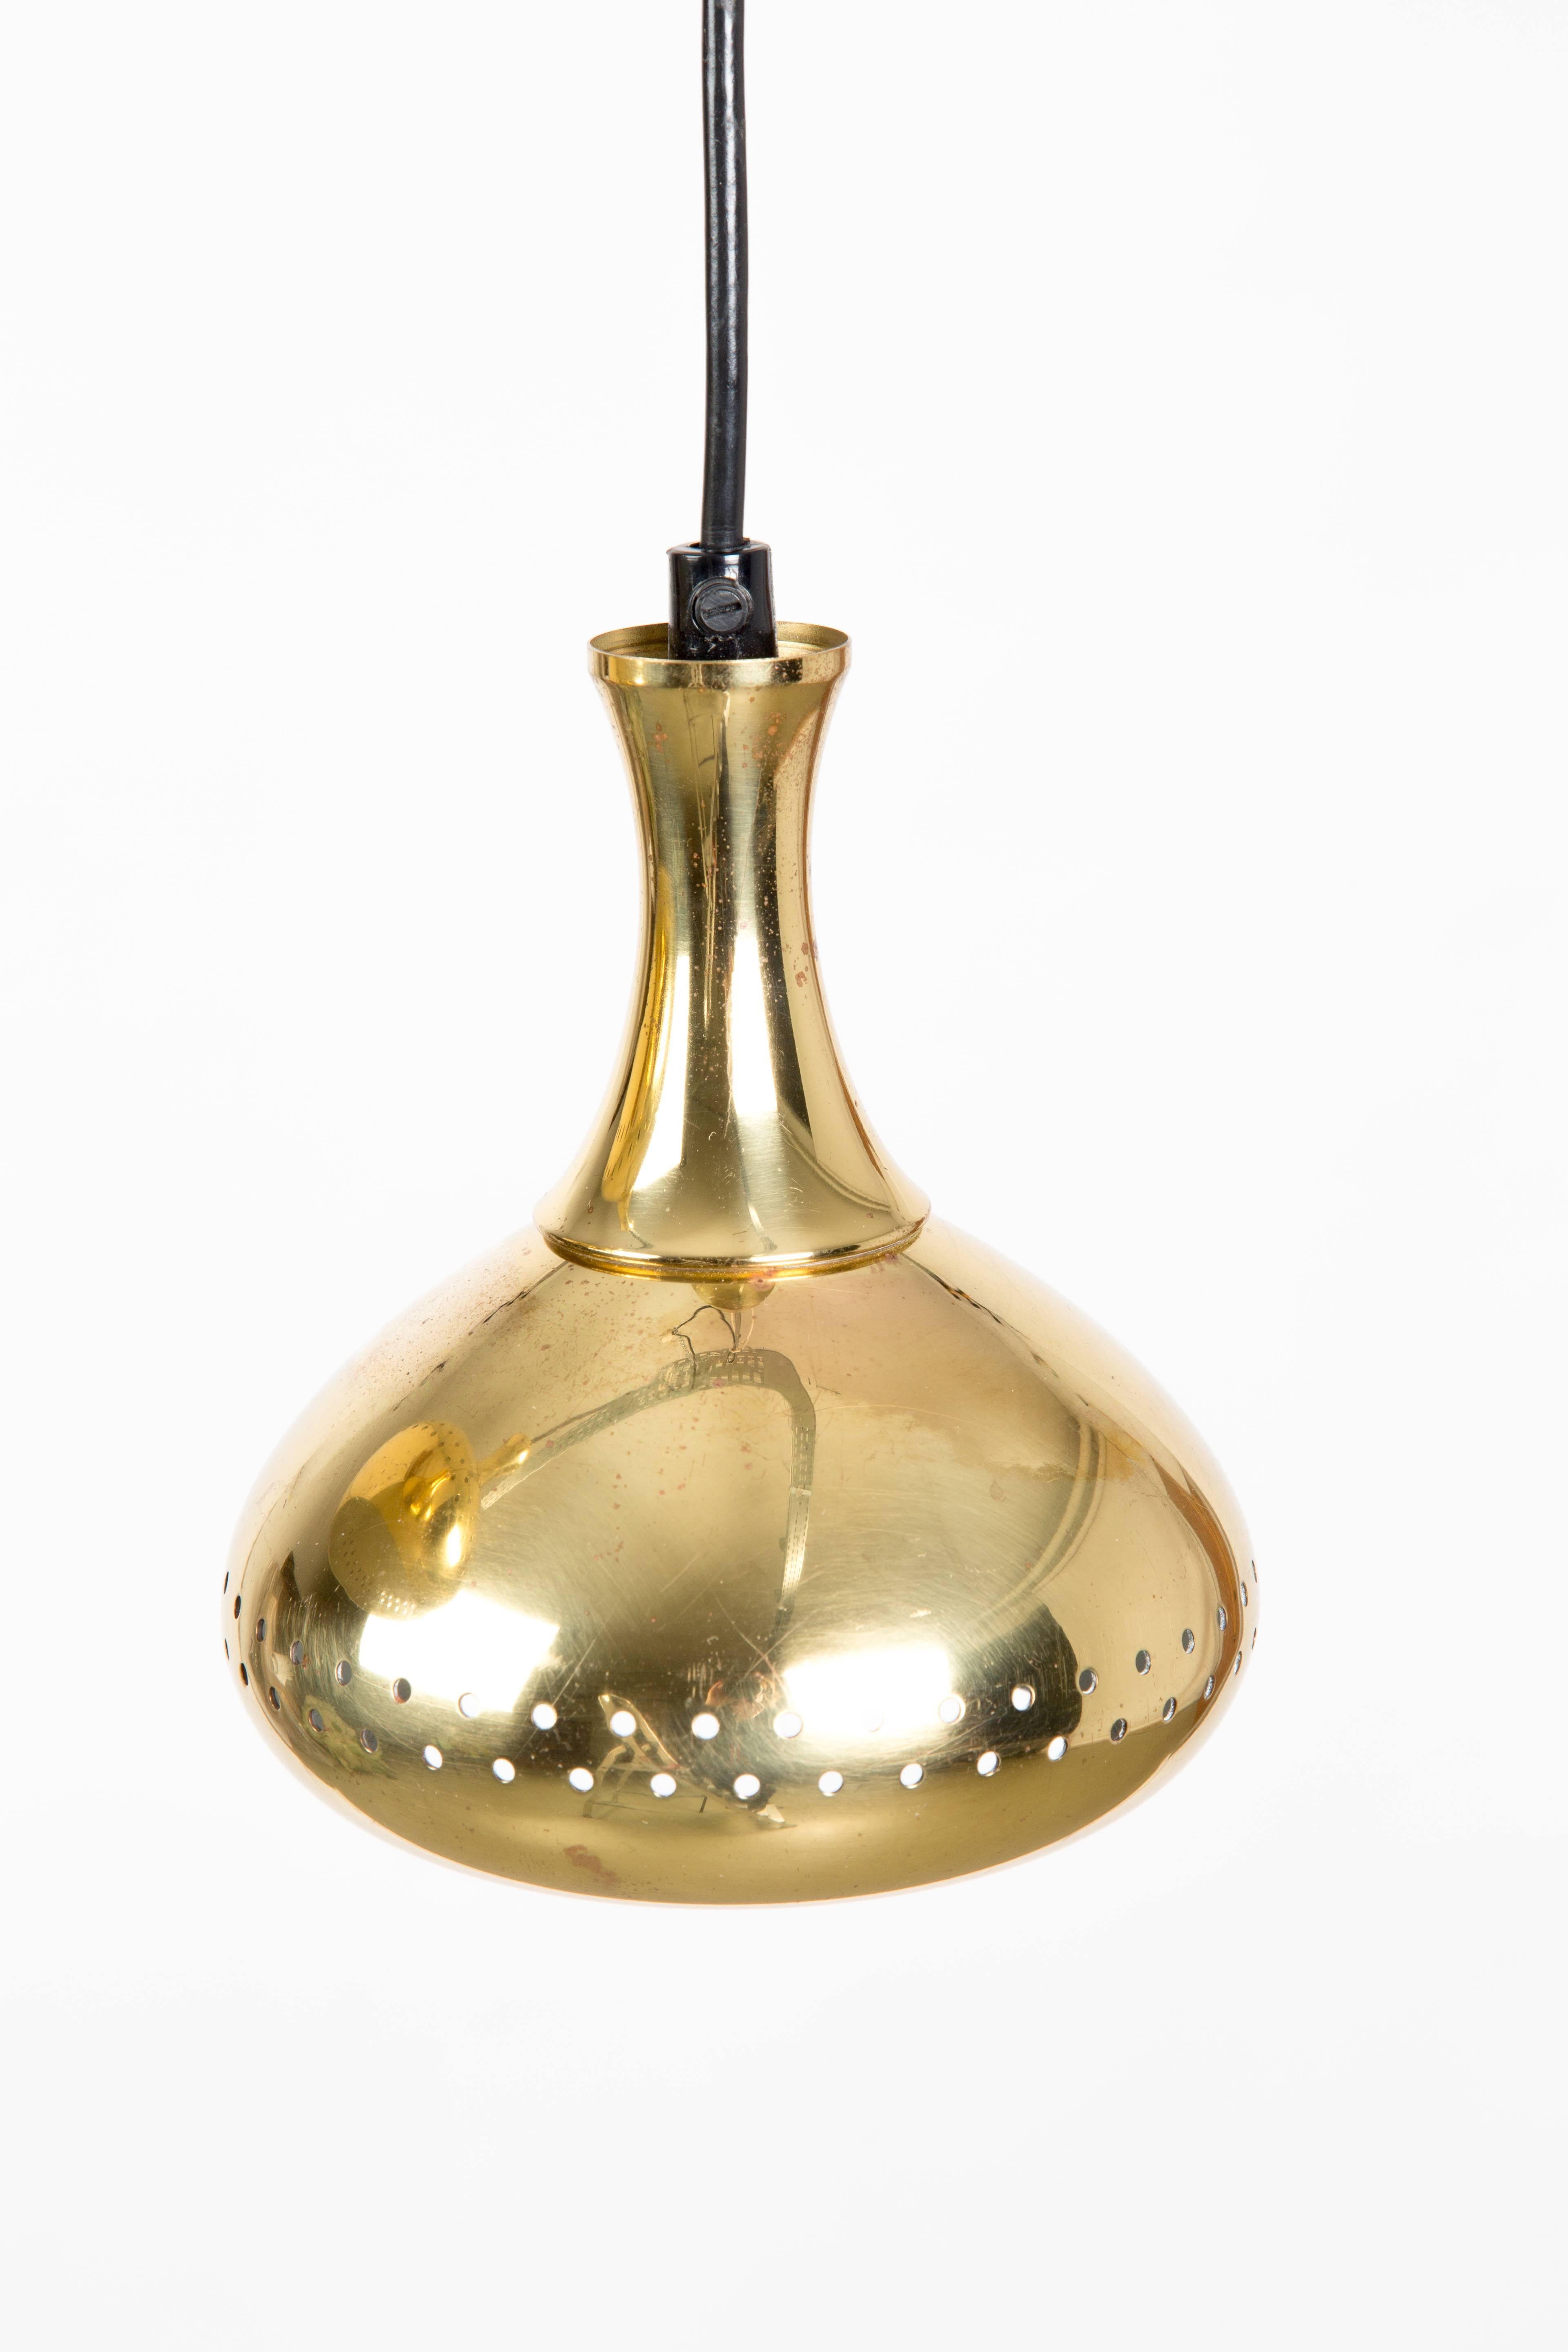 Pair of SWEDISH BRASS HANGLAMPS. The lamps are of brass outside and inside white painted. The small holes gives a diffused and romantic light. Designed by Hans-Agne Jakobsson.